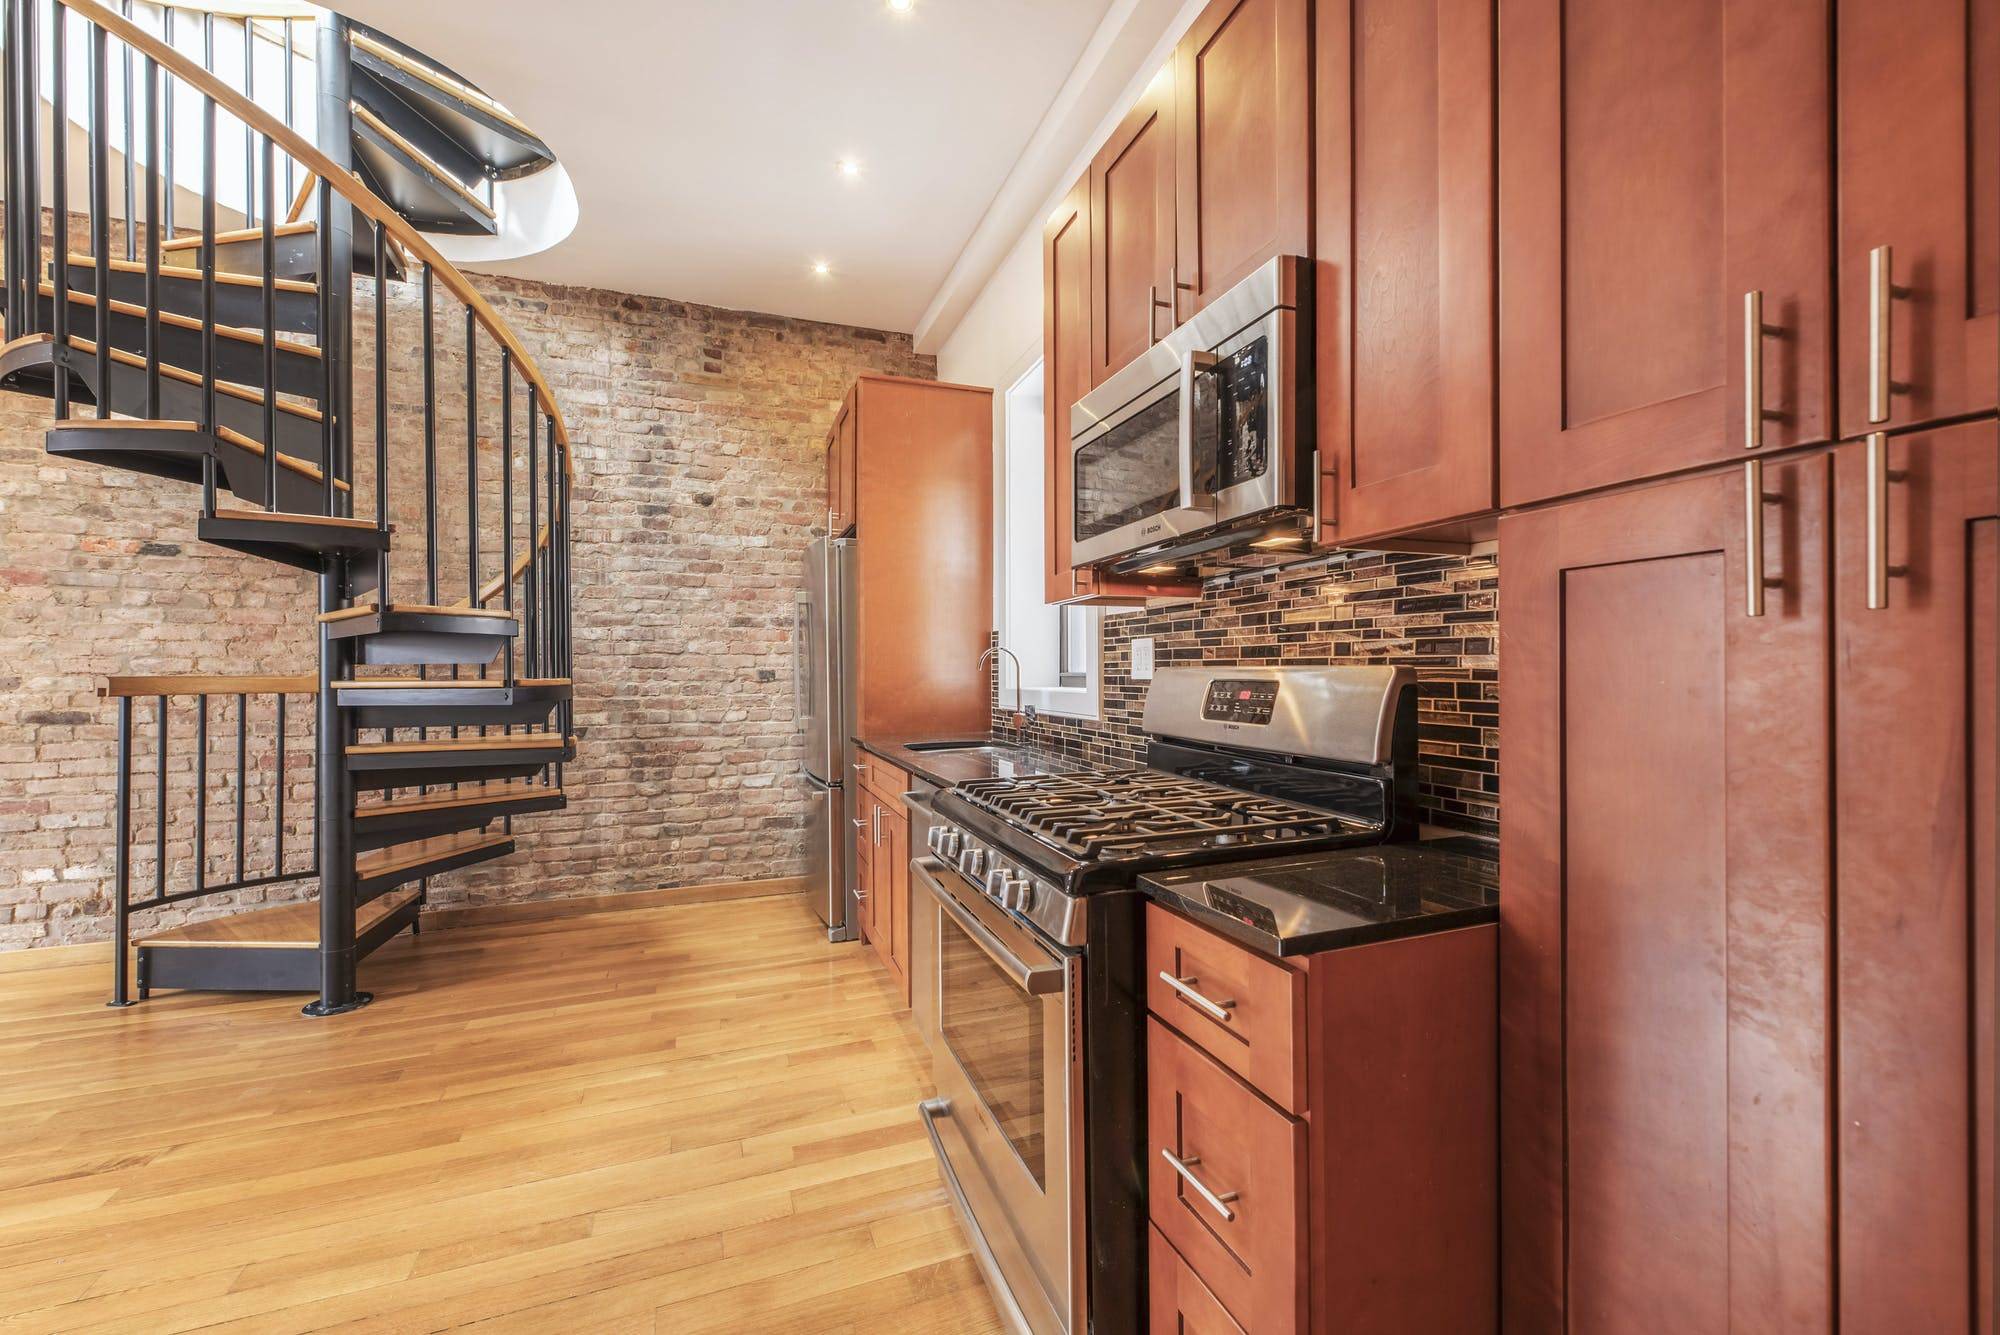 3D and IN PERSON TOURS AVAILABLE Located on a quiet tree lined street in the heart of Soho, this 6 story stunner offers the perks of new construction without losing ...